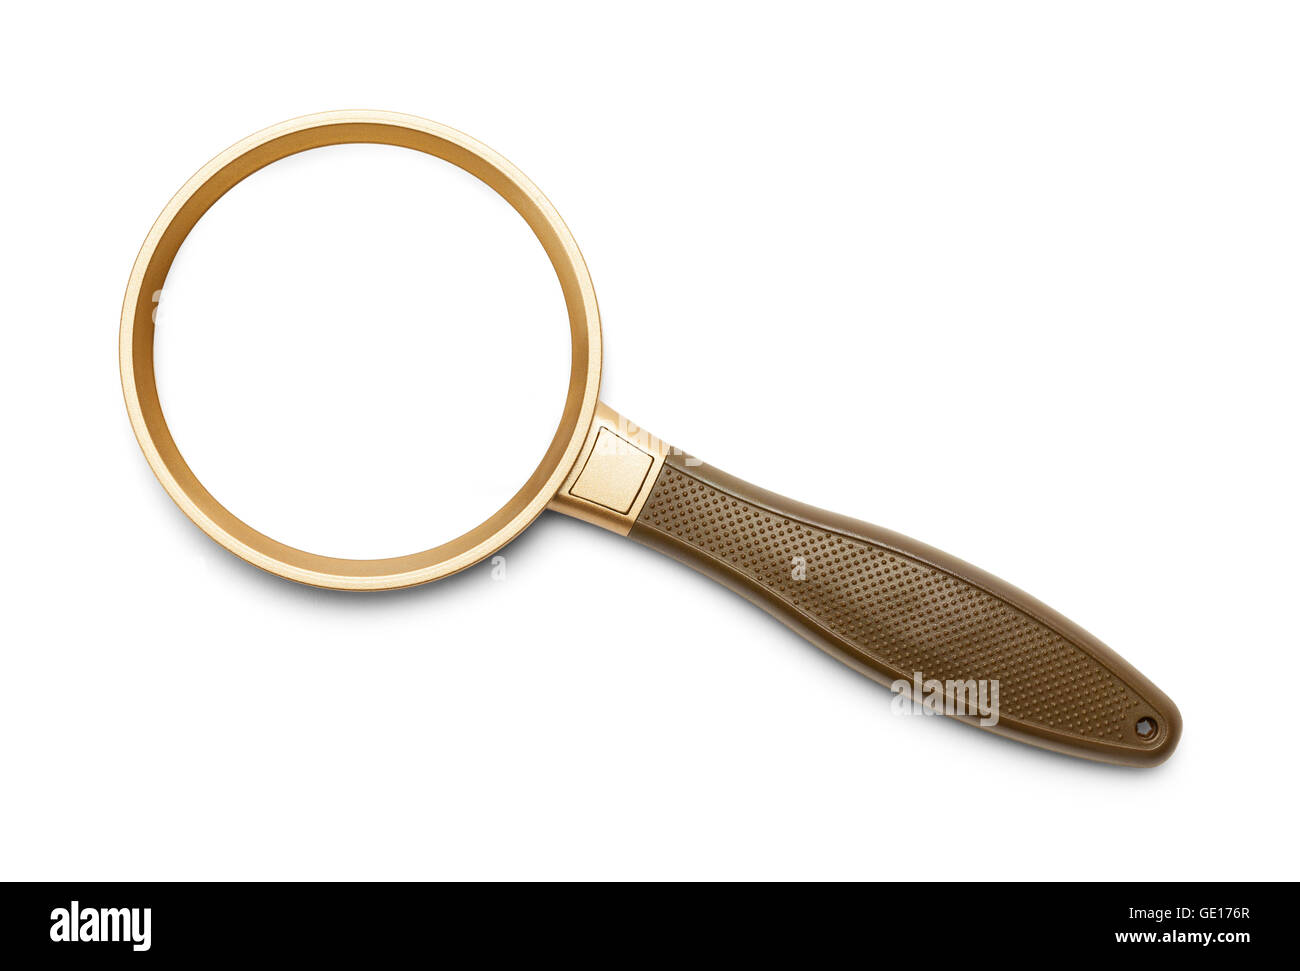 Gold und braun Magnifying Glass, Isolated on White Background. Stockfoto